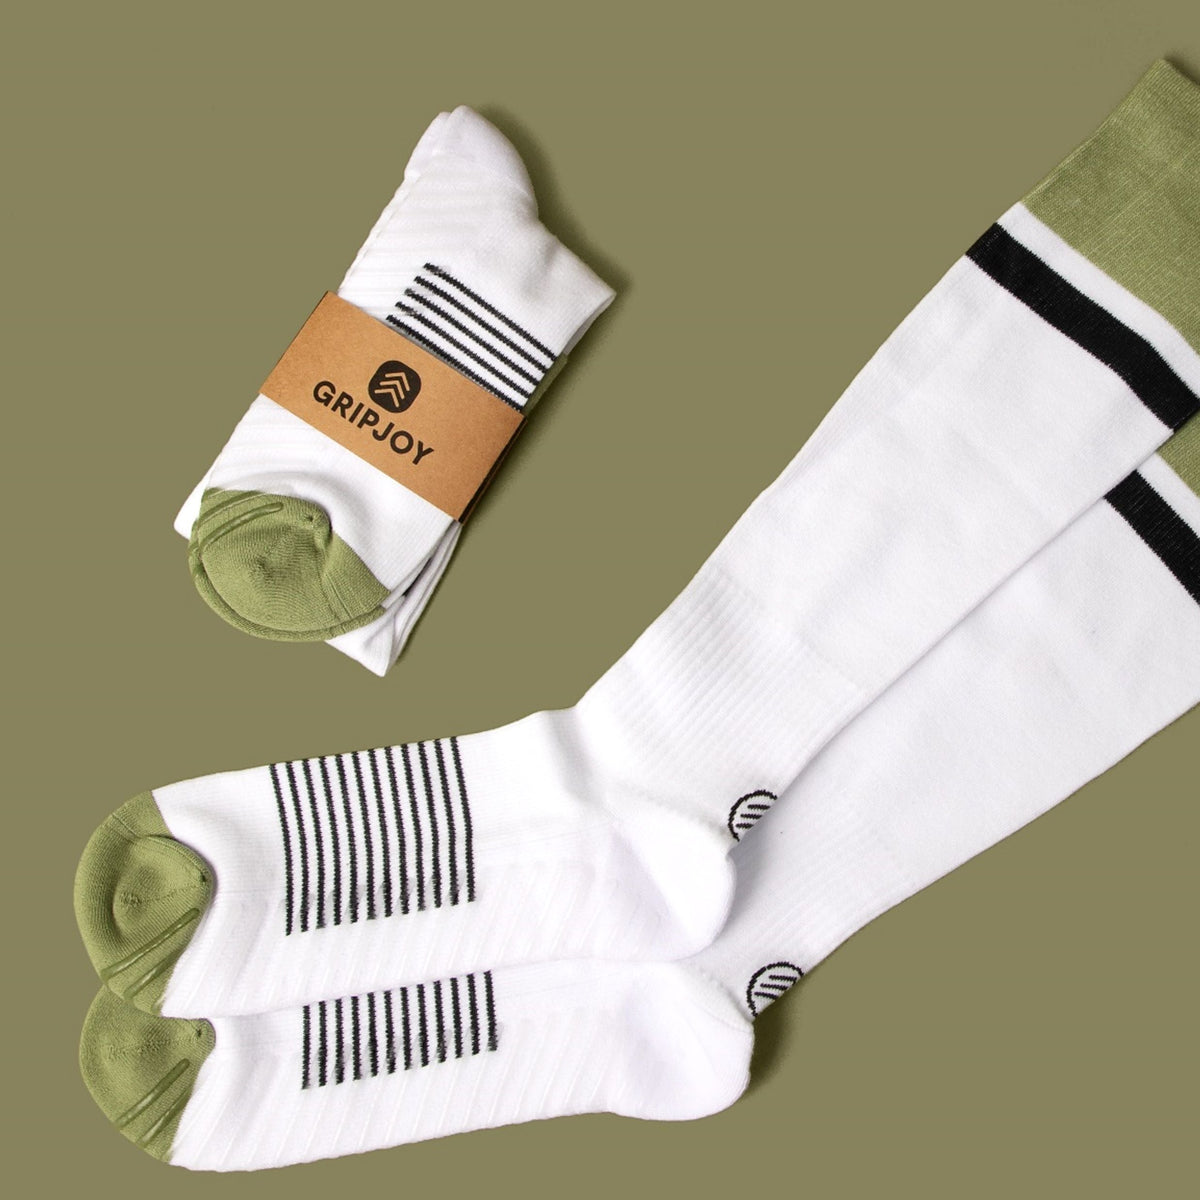 Men's White/Black/Green Compression Socks with Grips - 2 Pairs - Gripjoy  Socks